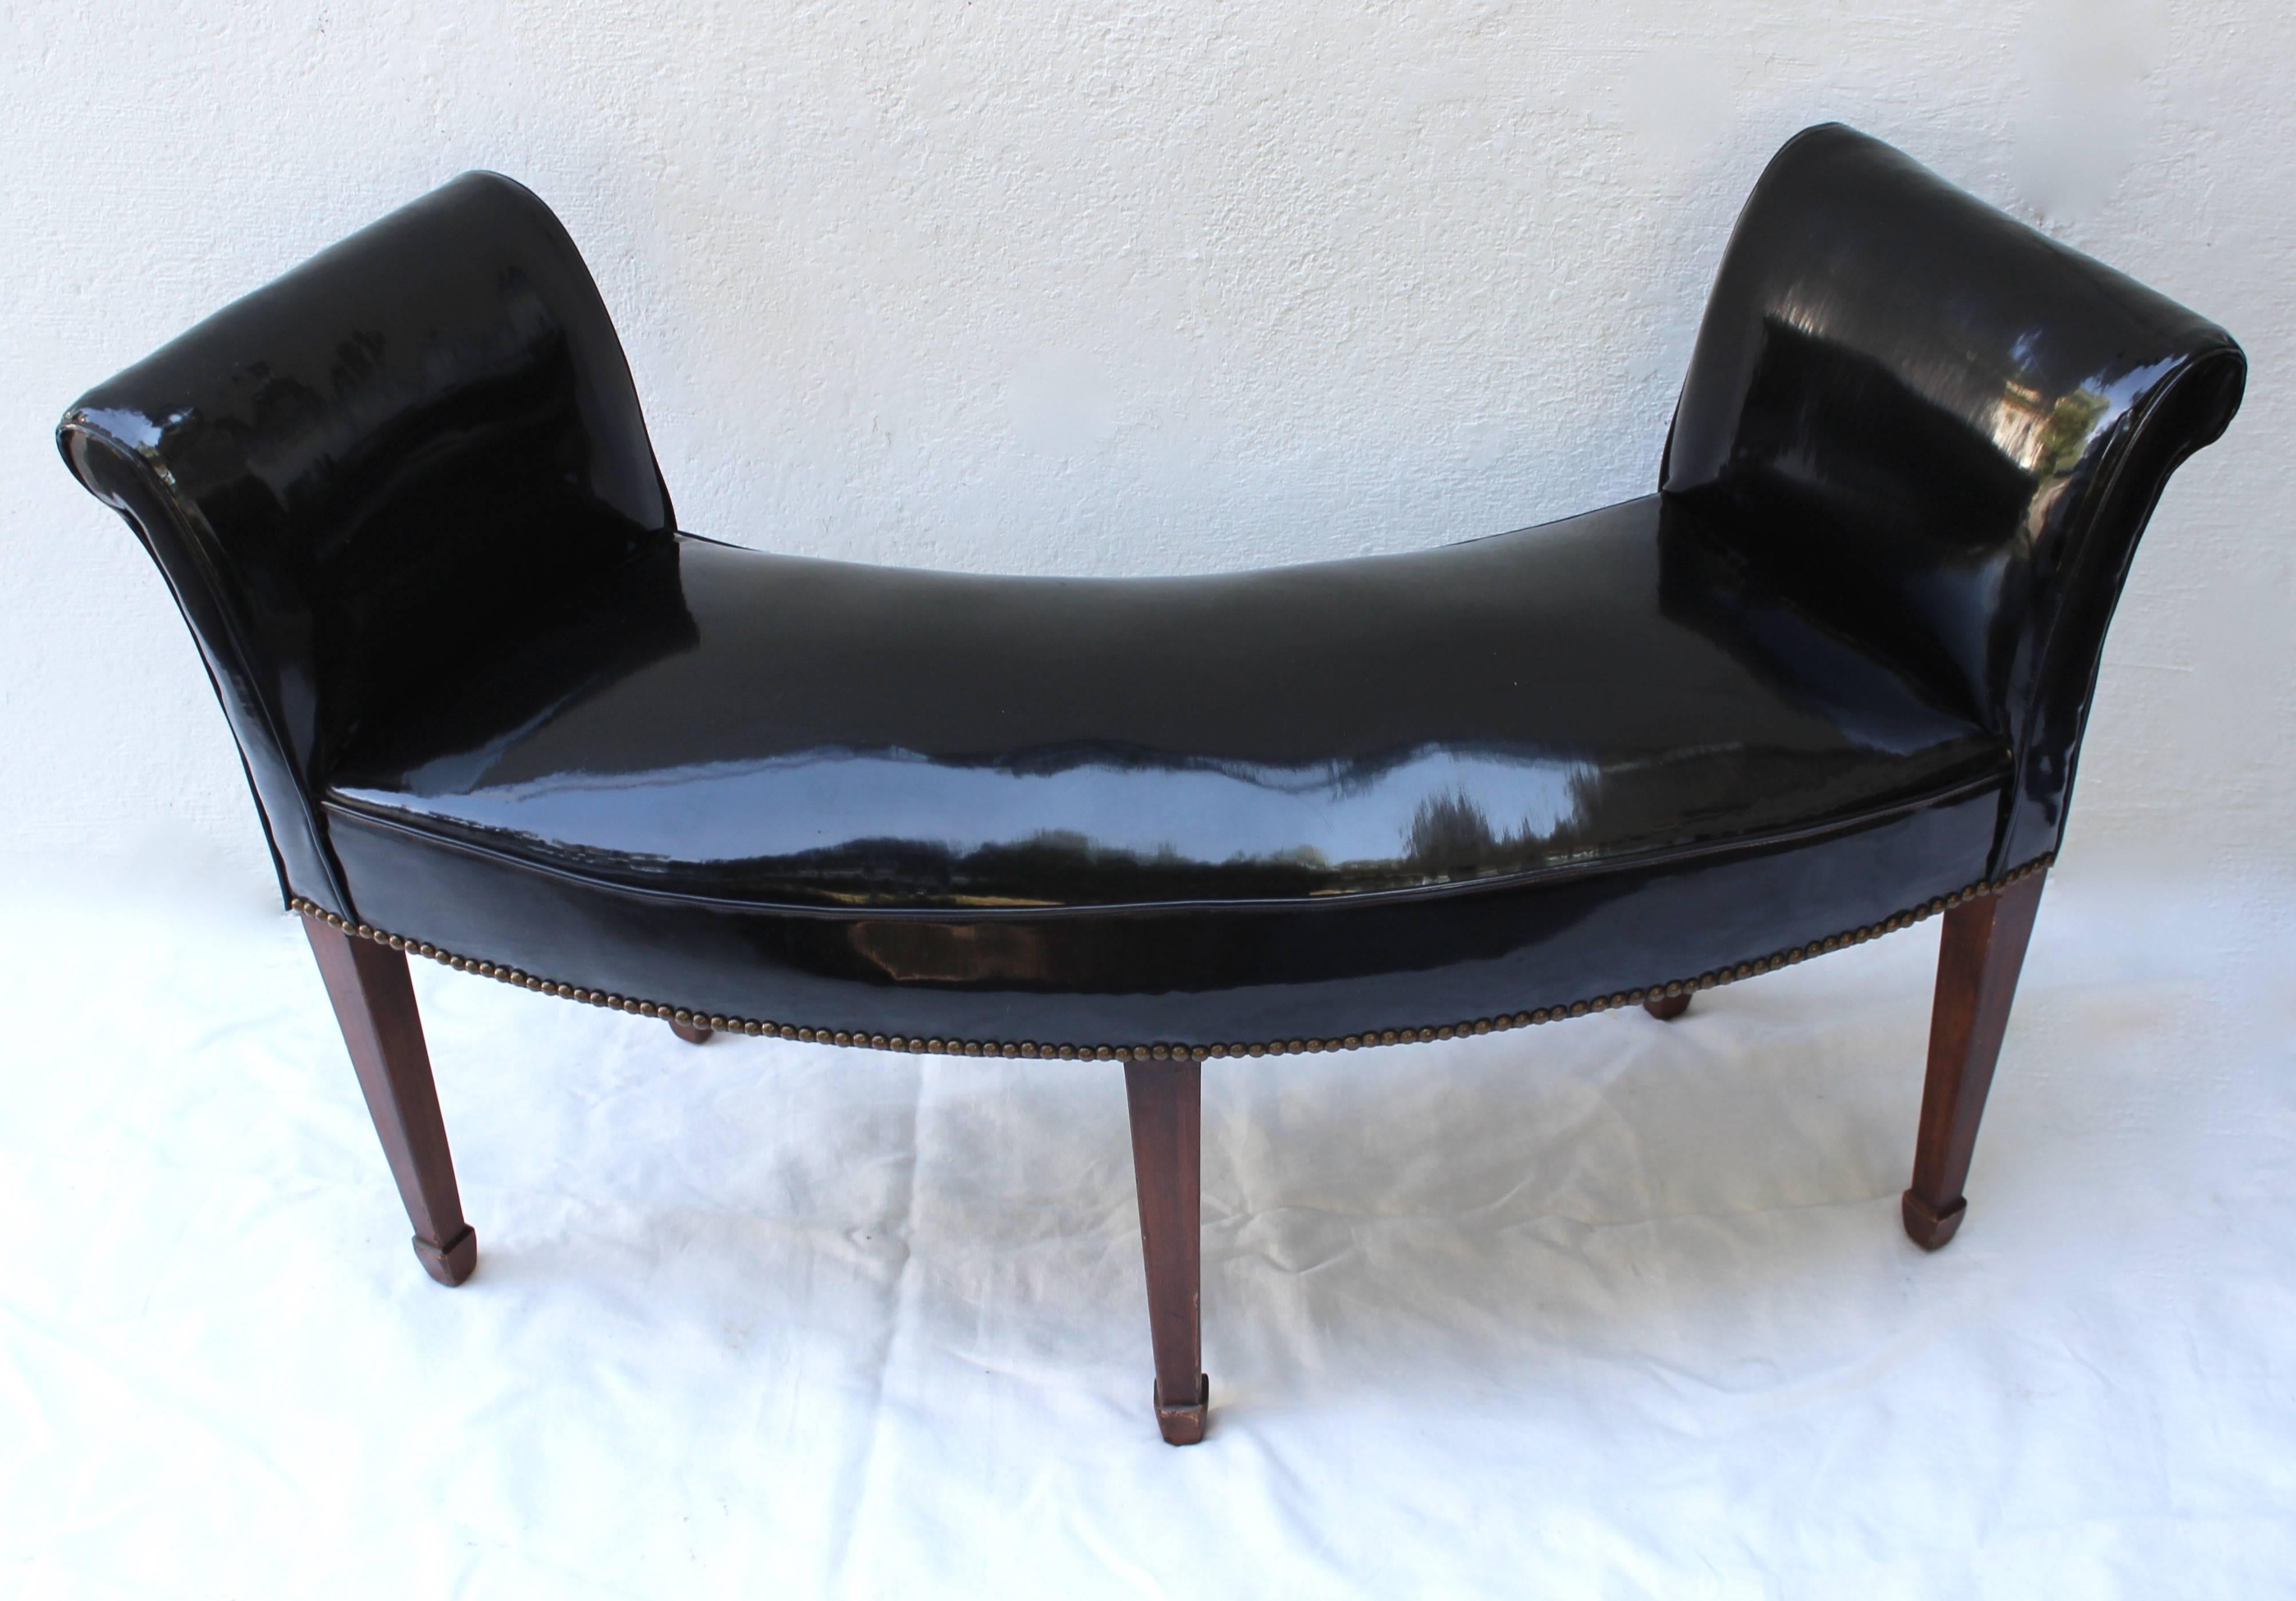 Great looking Regency style curved patent leather bench/window seat in the style of Maison Jansen.